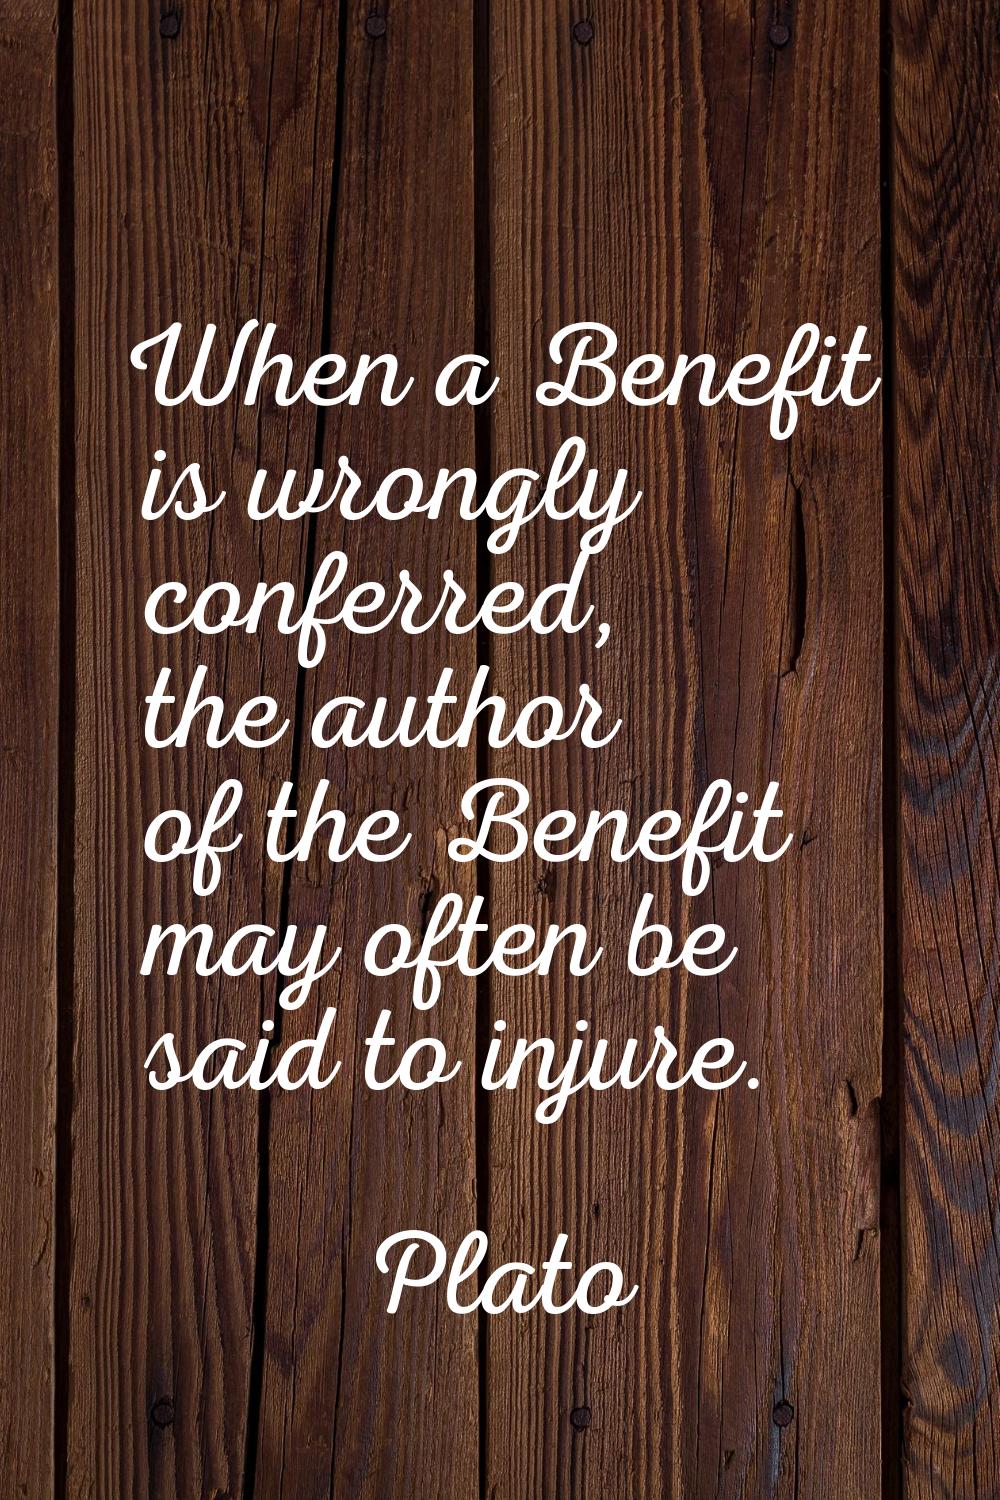 When a Benefit is wrongly conferred, the author of the Benefit may often be said to injure.